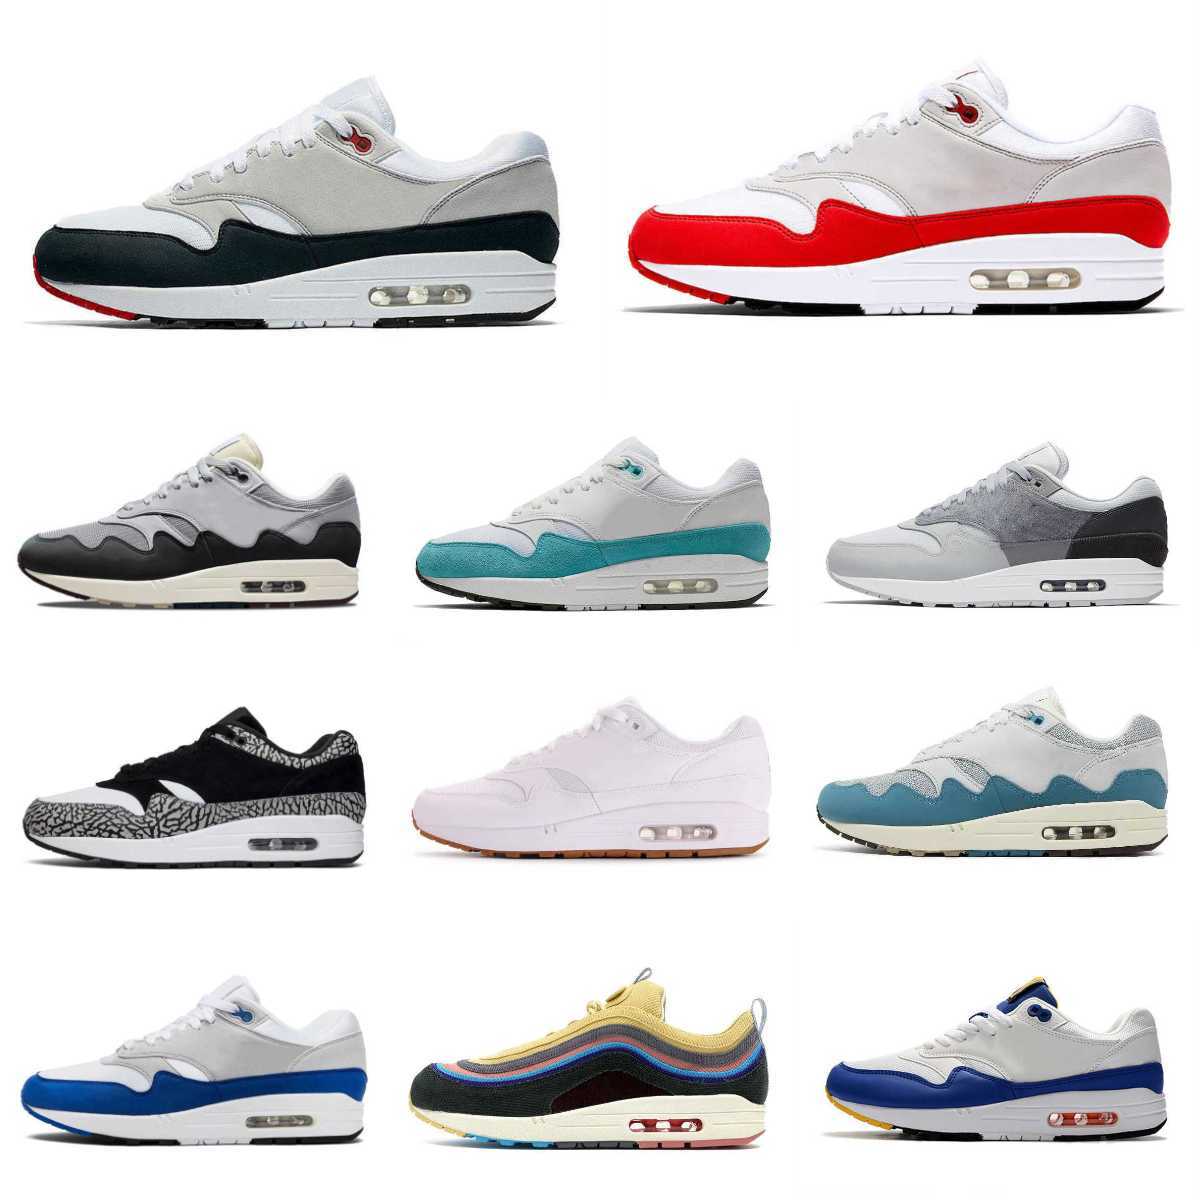 

Trainers Classic 1 87 Running Casual Shoes Mens Women Sean Wotherspoon Patta Waves Noise Aqua Monarch AirmaXs Anniversary Royal London Patch Outdoor Sneakers S8, Please contact us